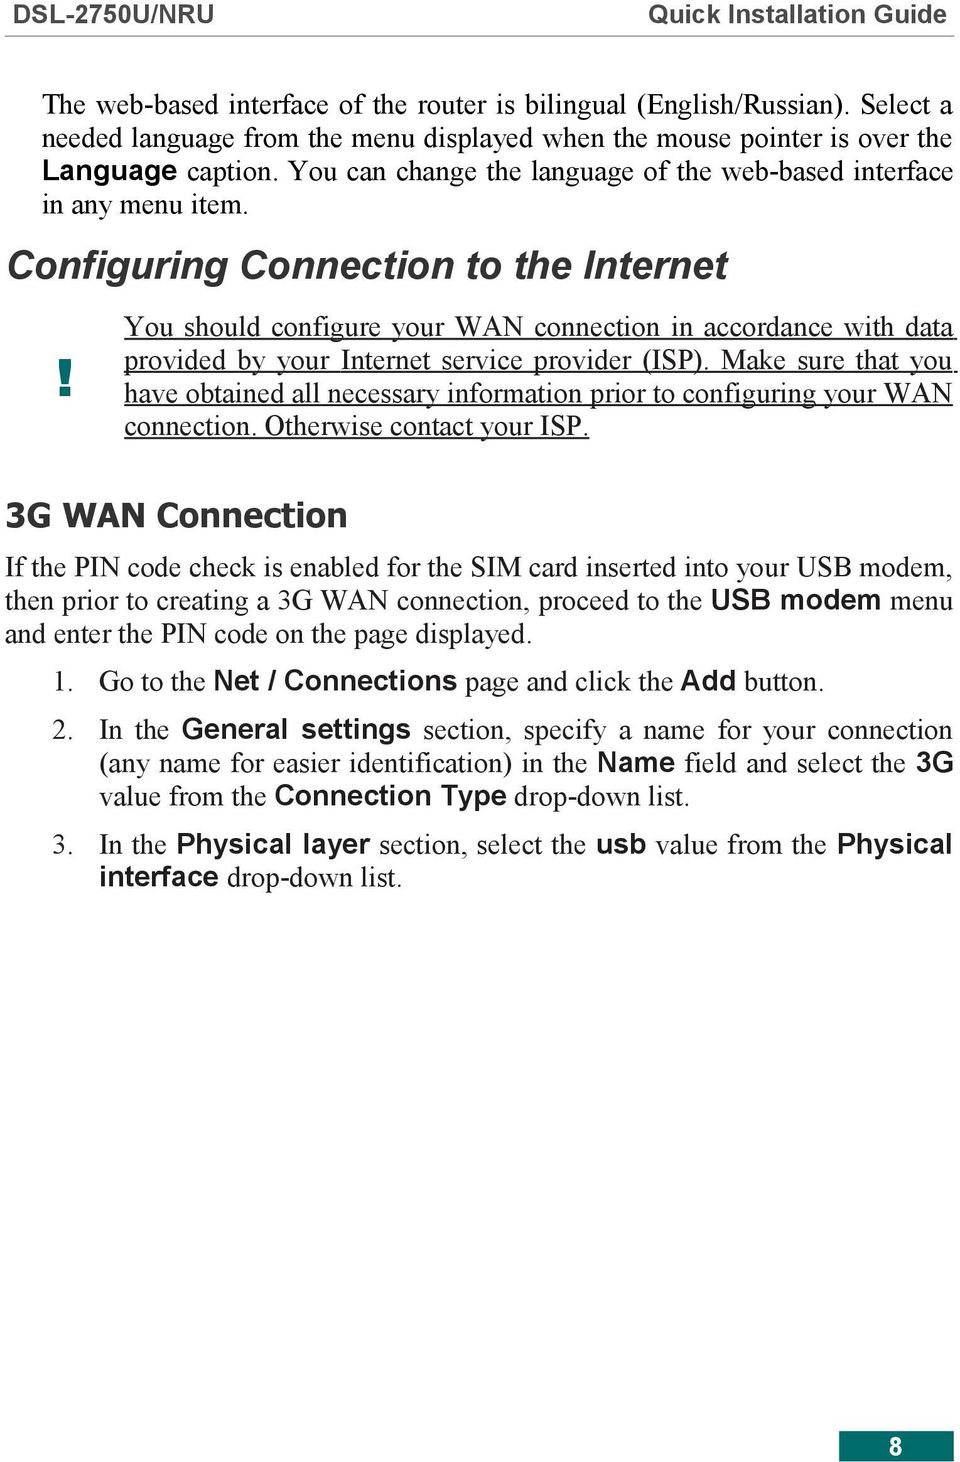 You should configure your WAN connection in accordance with data provided by your Internet service provider (ISP).